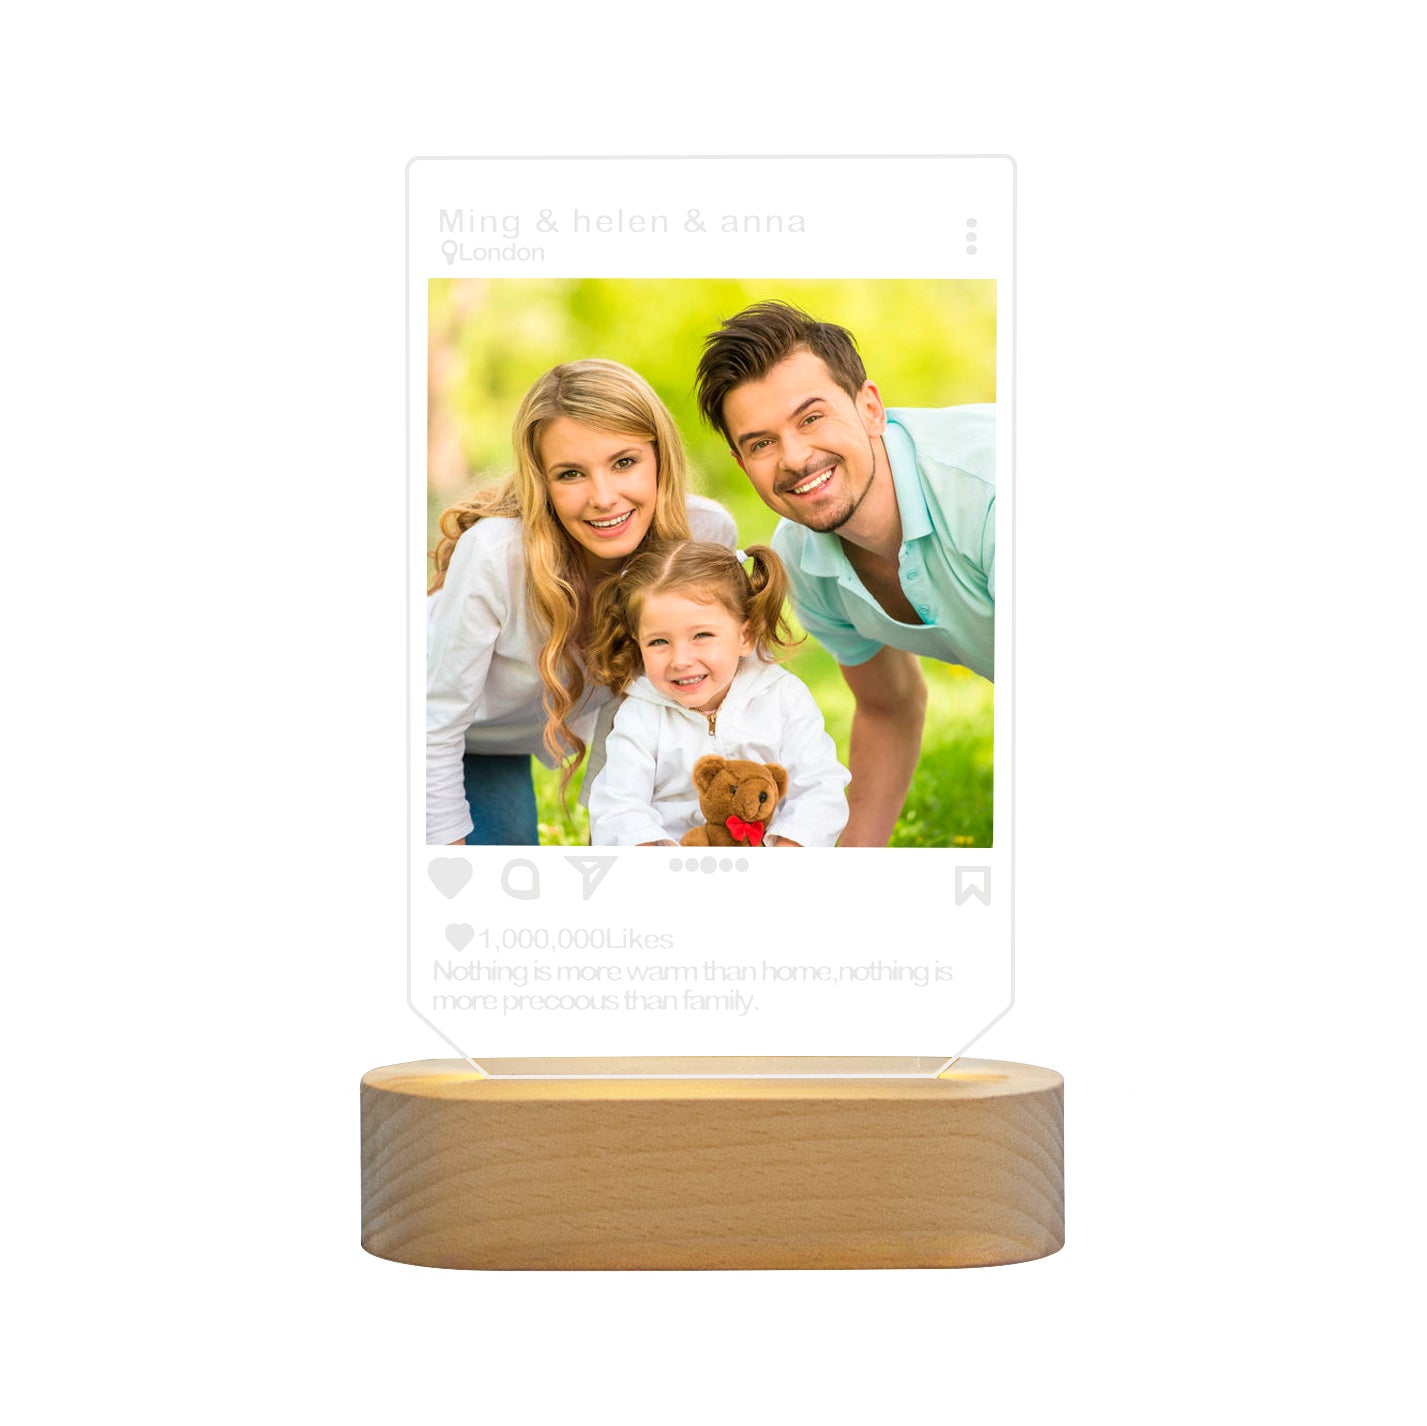 Acrylic LED Light with Solid Wooden Based with Personalized picture and Text